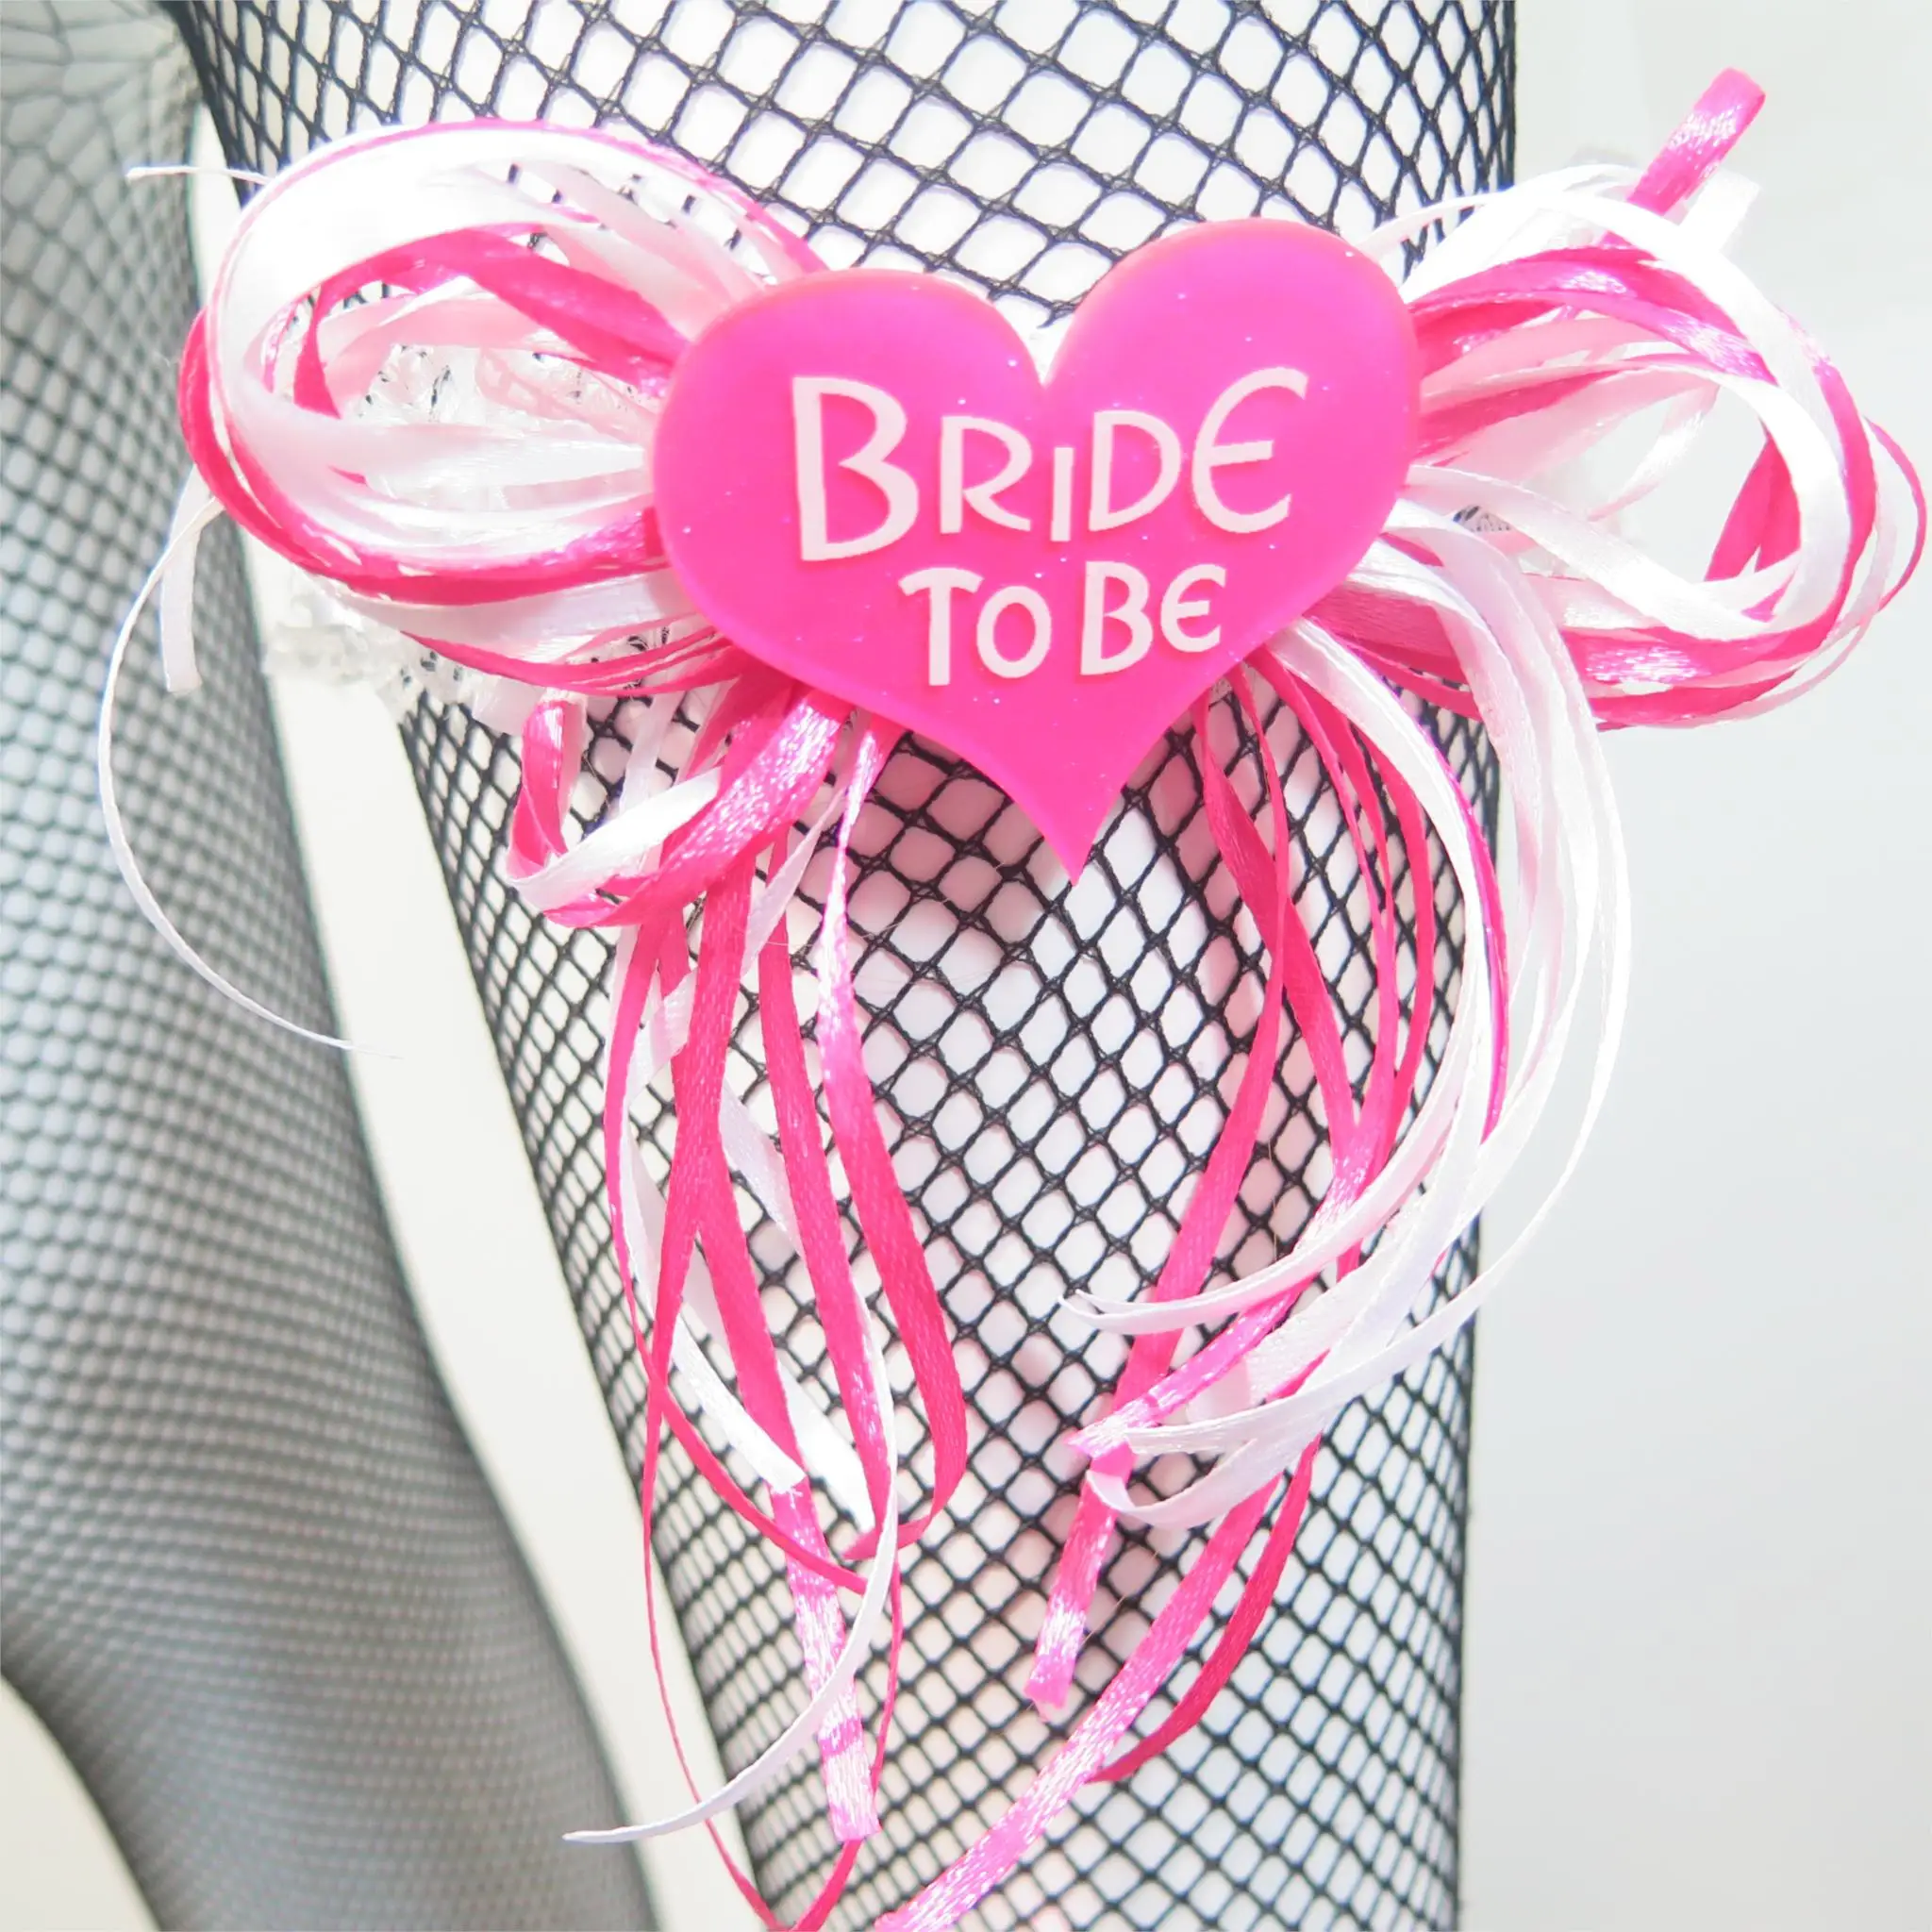 Bride To Be Pink Heart Design with ribbons Bachelorette Party Garter 